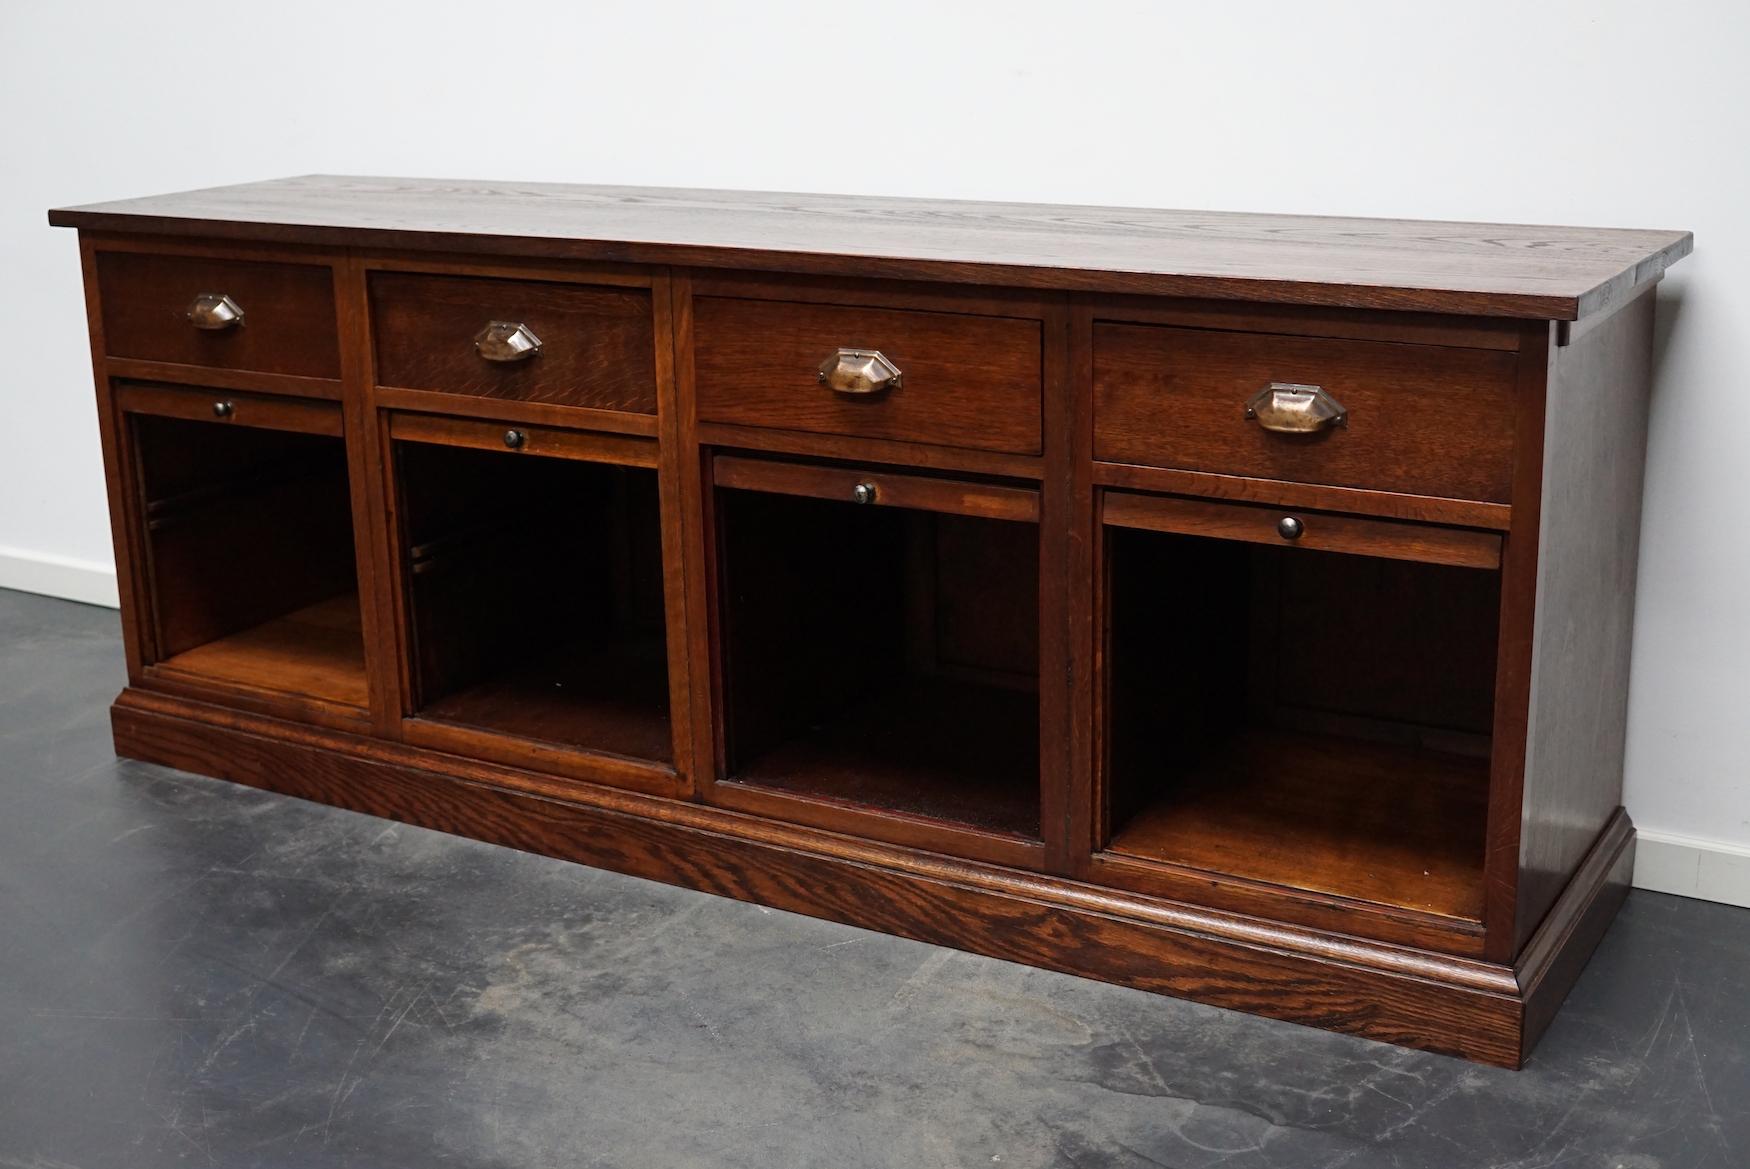 This very unusual sideboard was made from oak in the Netherlands ca 1930's. It features 4 compartments with sliding doors and 4 drawers with brass cup handles. It is in a very good restored condition.